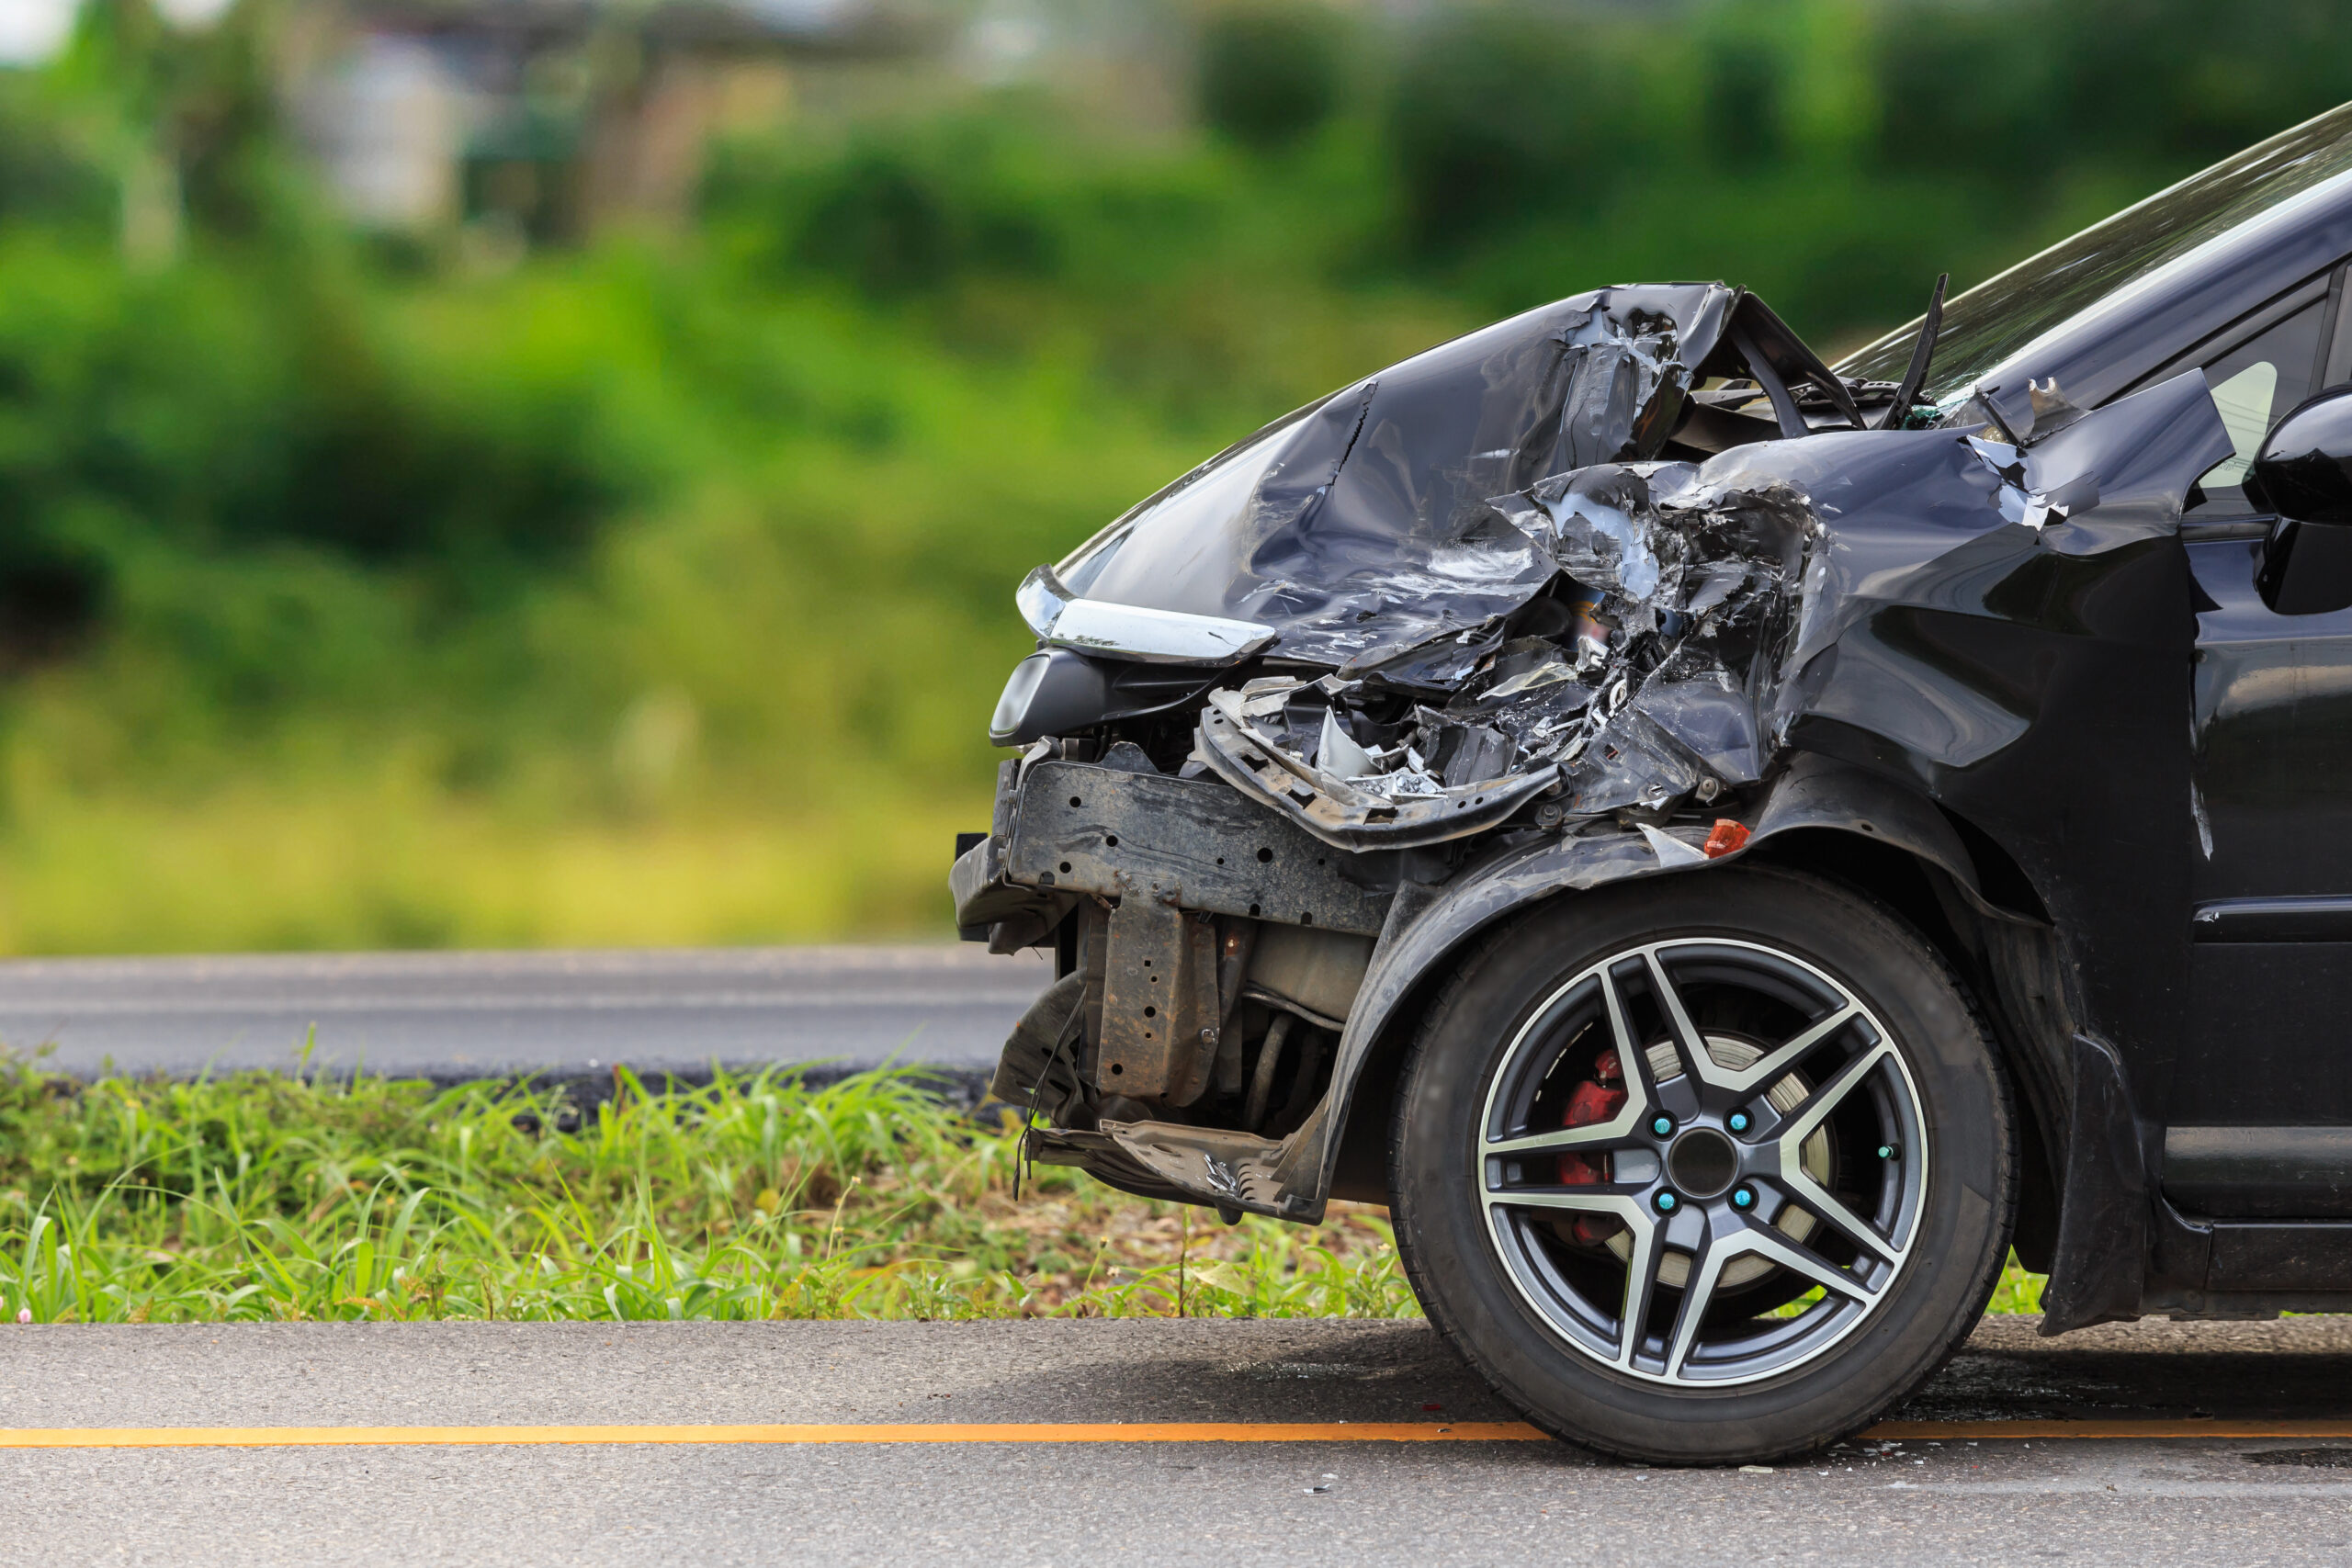 Can I Sue a Rental Car Company for an Accident?